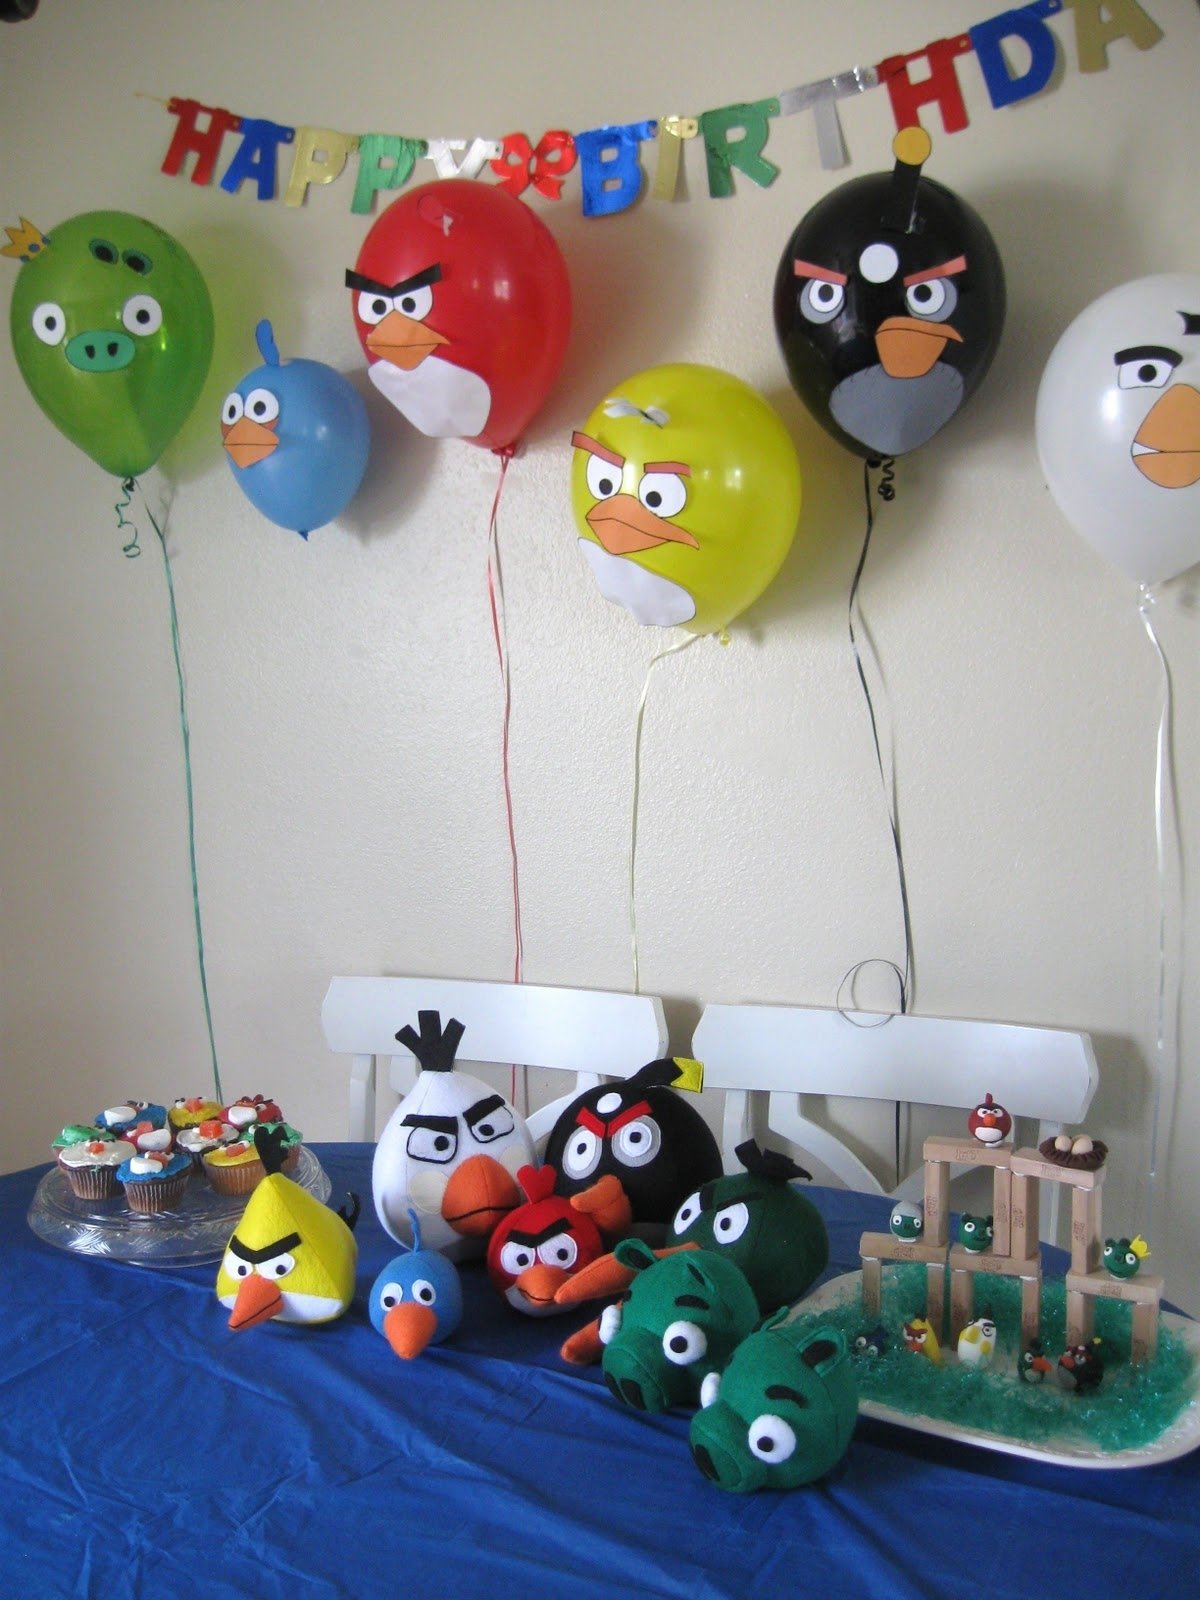 10 Awesome Birthday Ideas For A 5 Year Old Boy angry birds balloons jacks next birthday party idea ideas for 1 2022